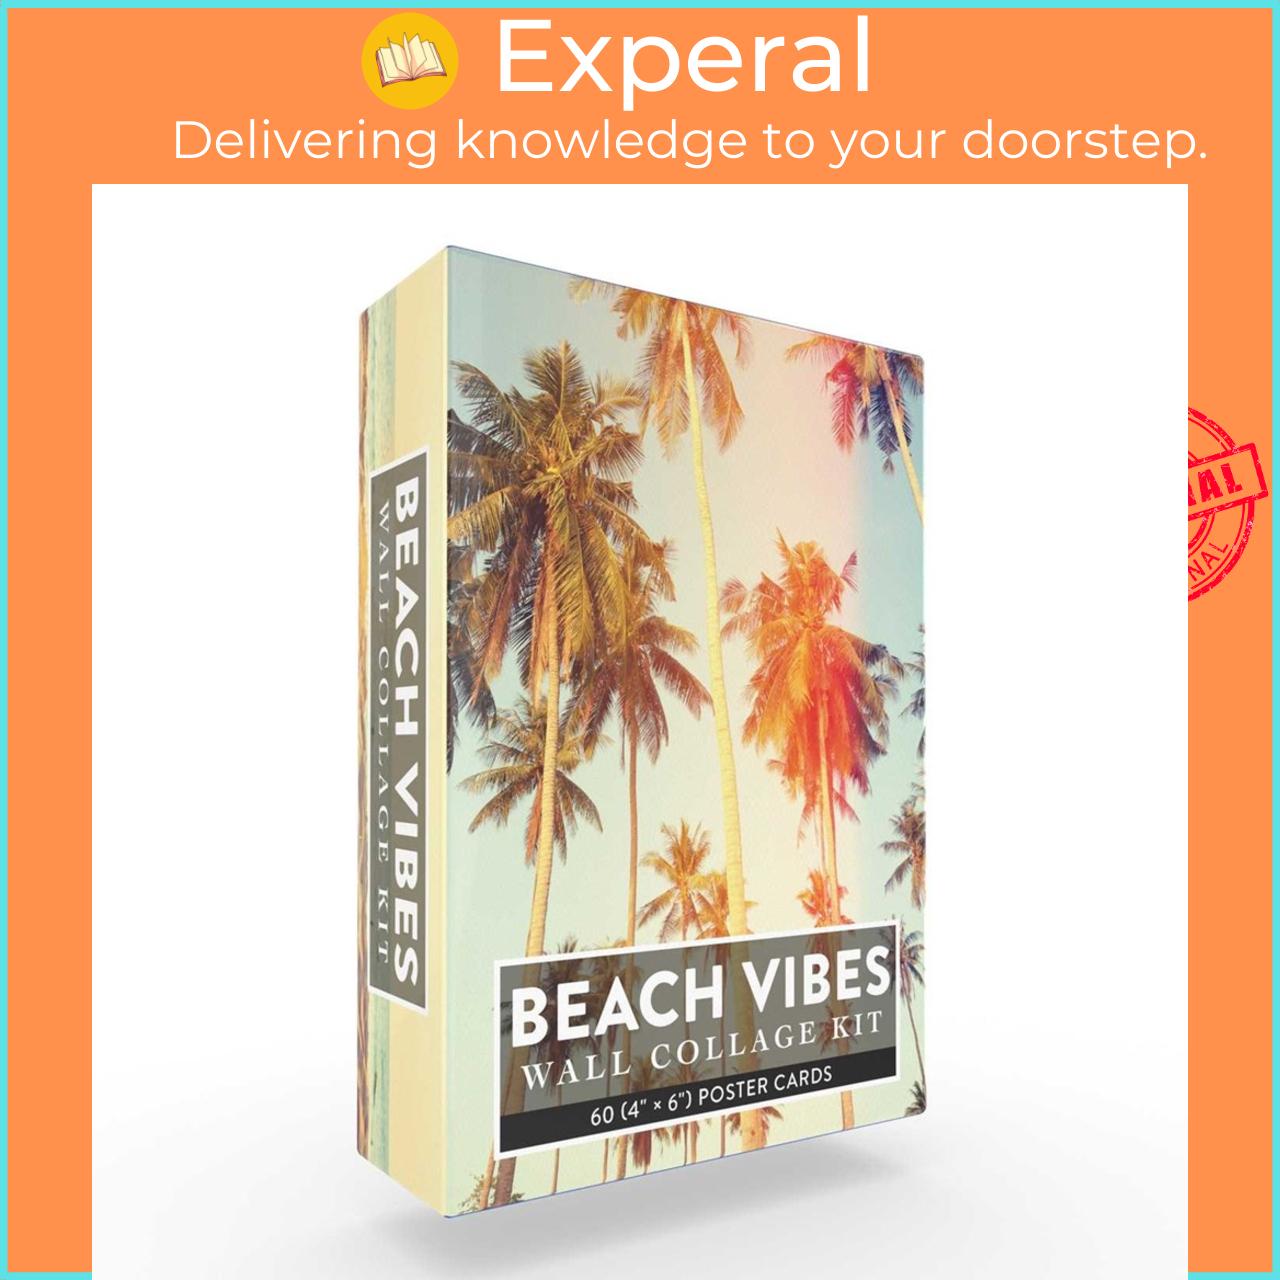 Sách - Beach Vibes Wall Collage Kit - 60 (4" × 6") Poster Cards by Unknown (US edition, Cards)